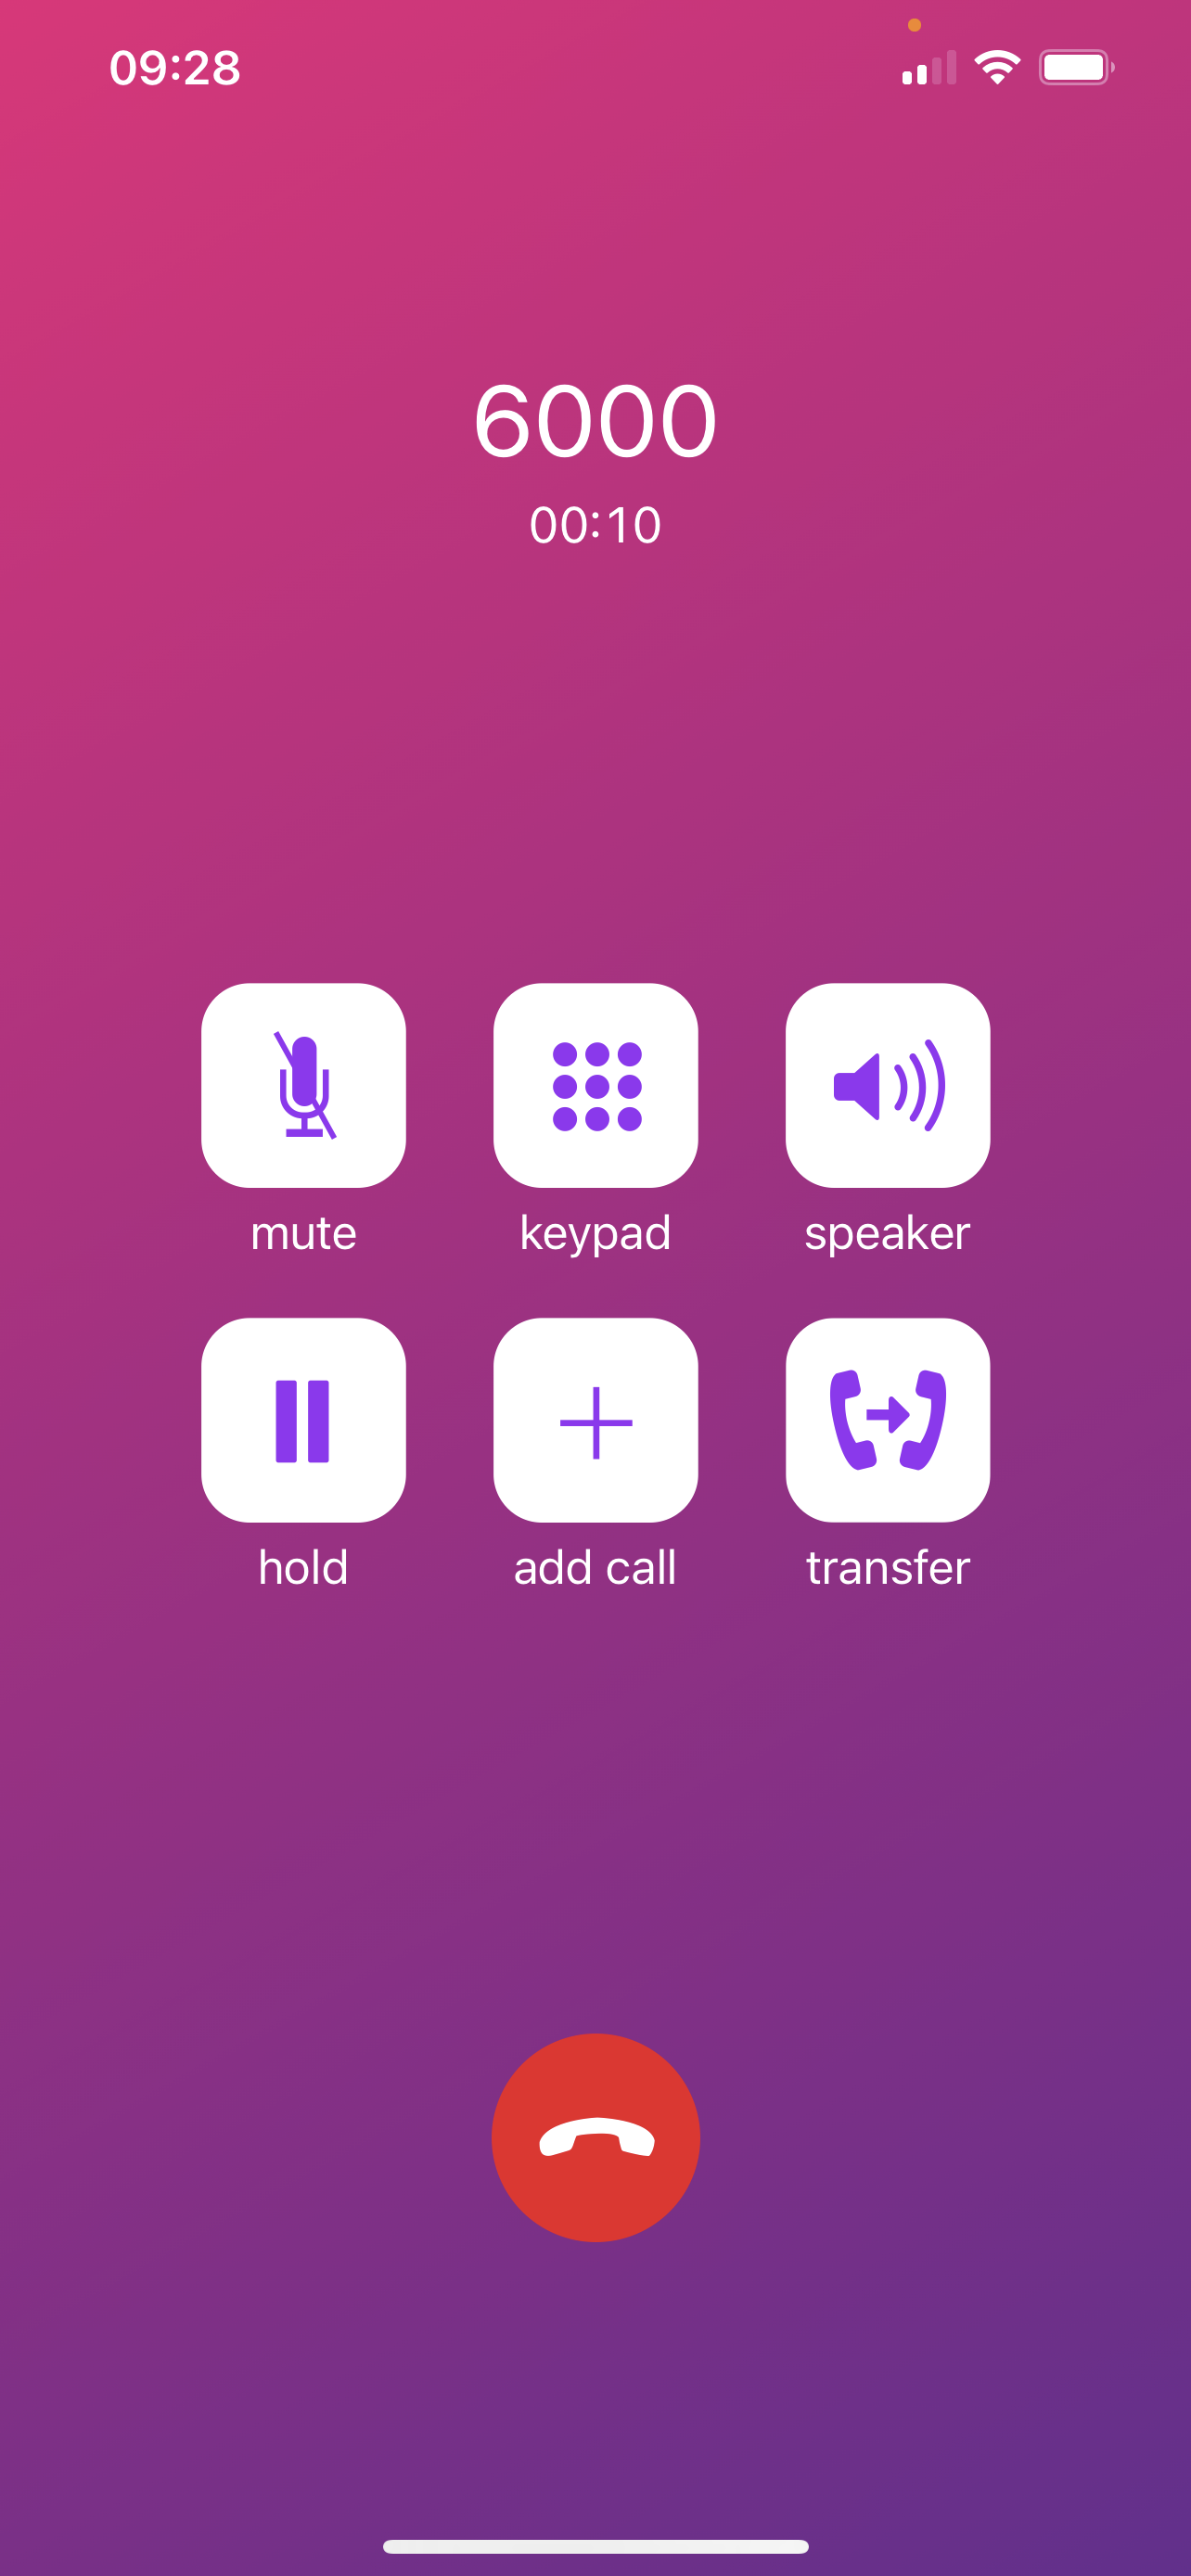 PulseHD softphone app and phone system